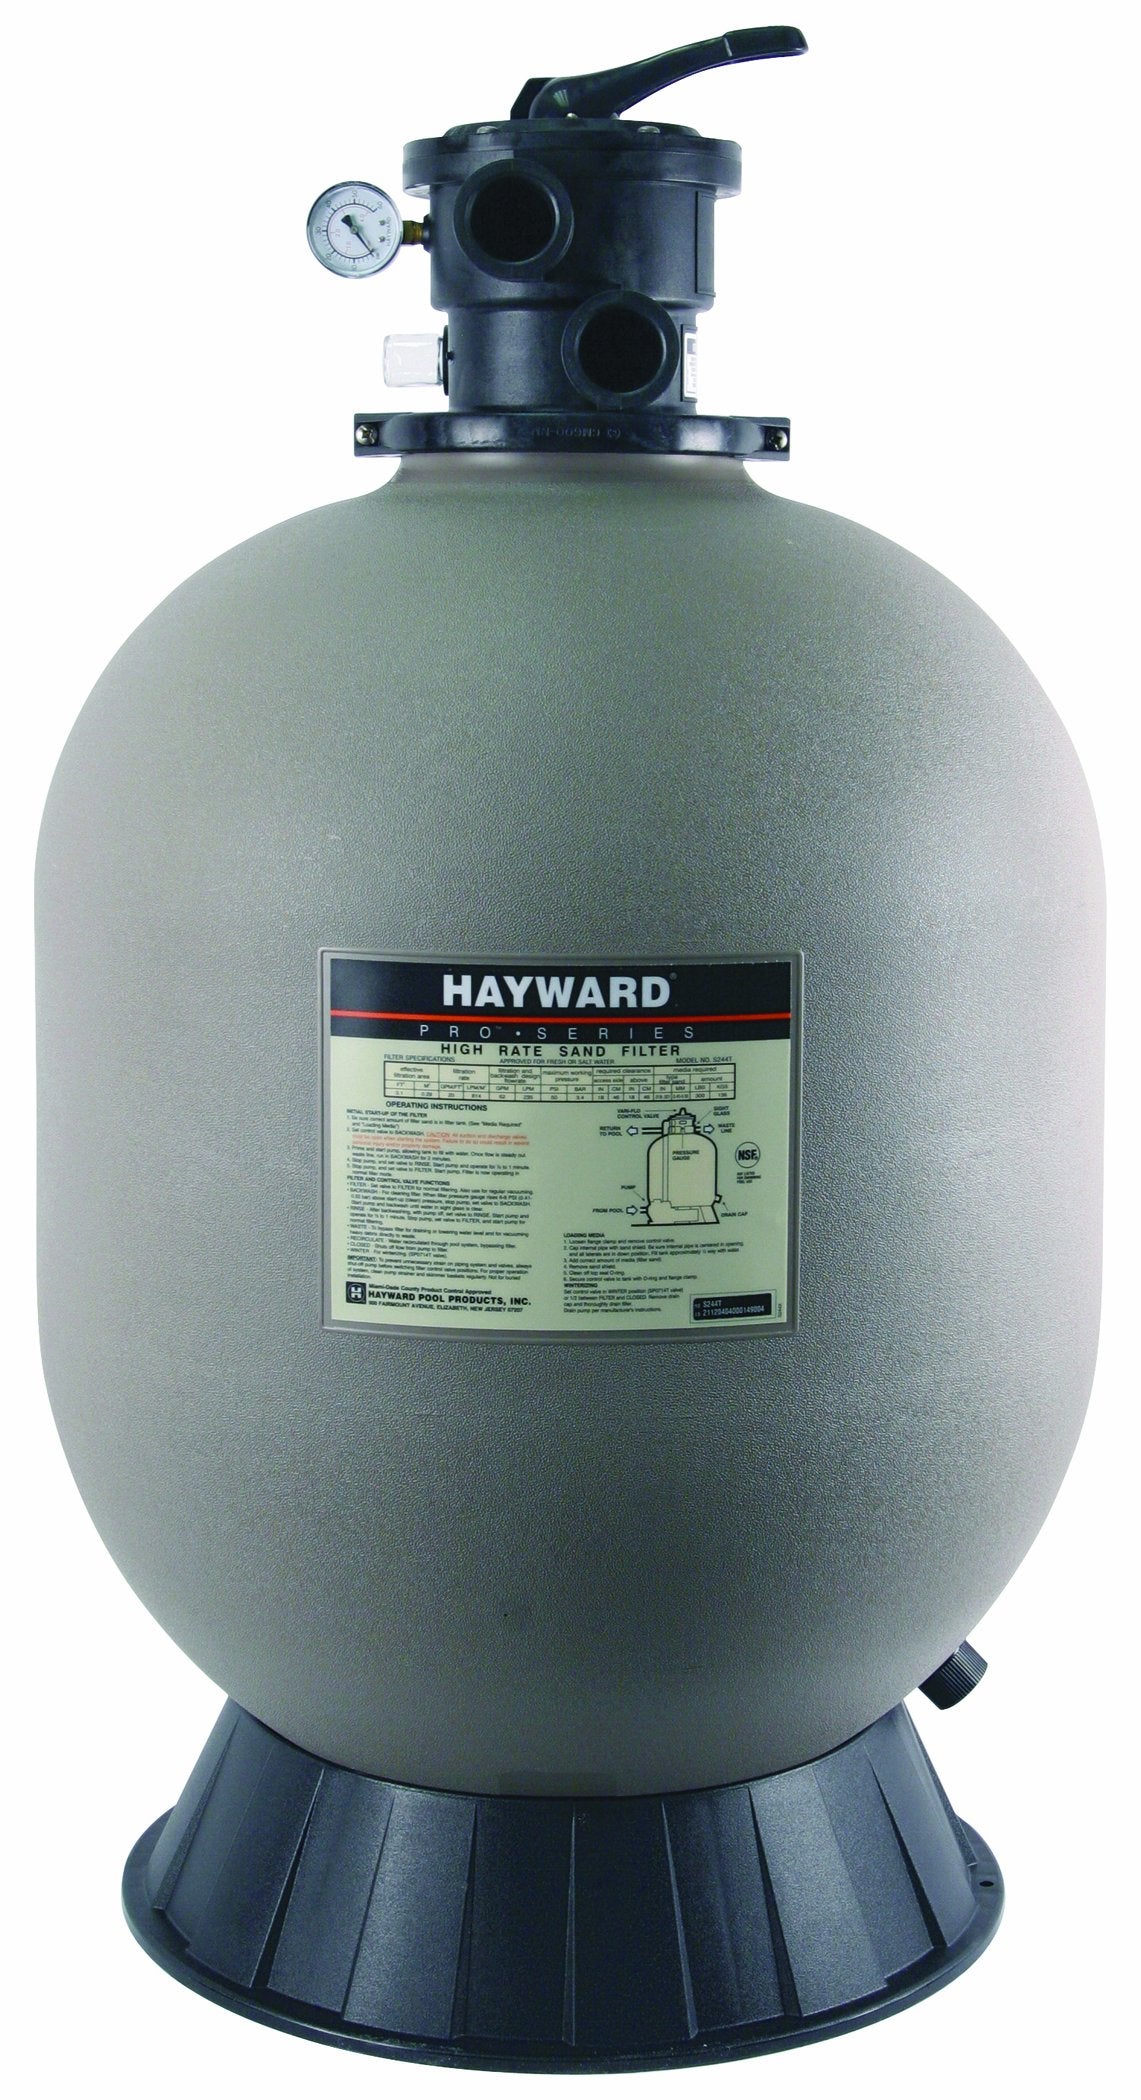 Hayward W3S270T ProSeries Sand Filter, 27-Inch, Top-Mount 27 Inch (W3S270T)